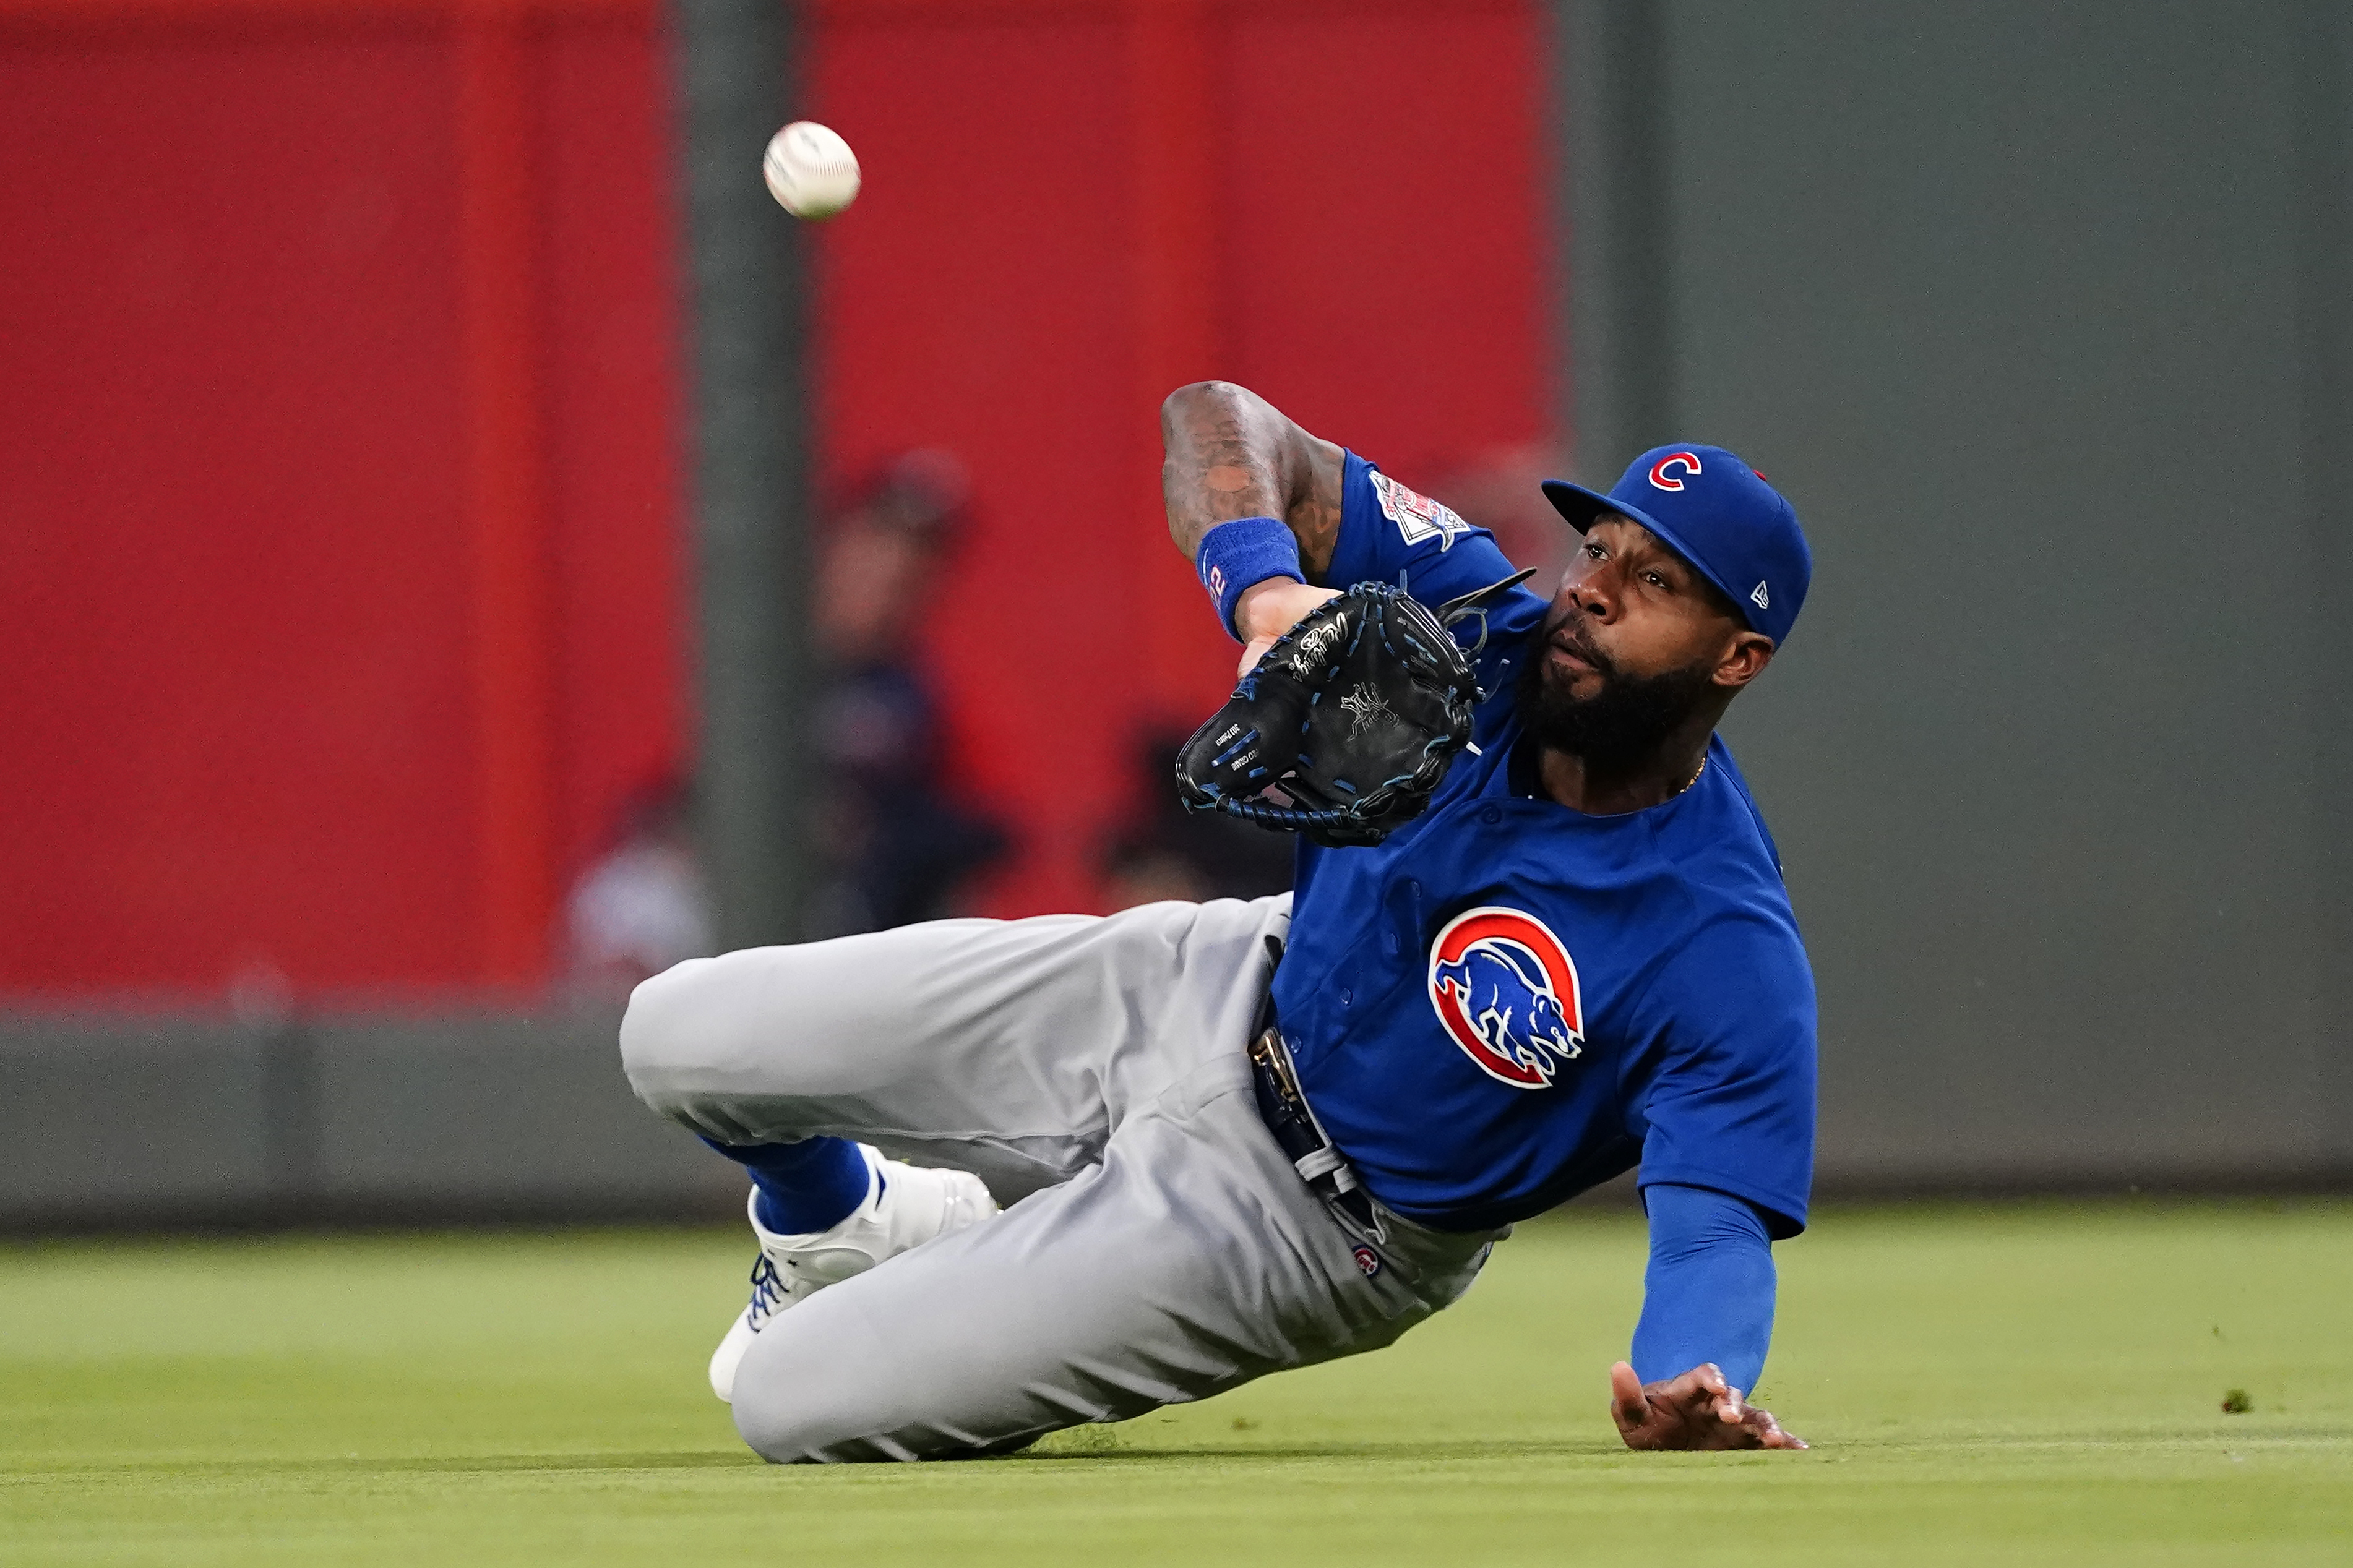 At what point should the Chicago Cubs move on from Jason Heyward?